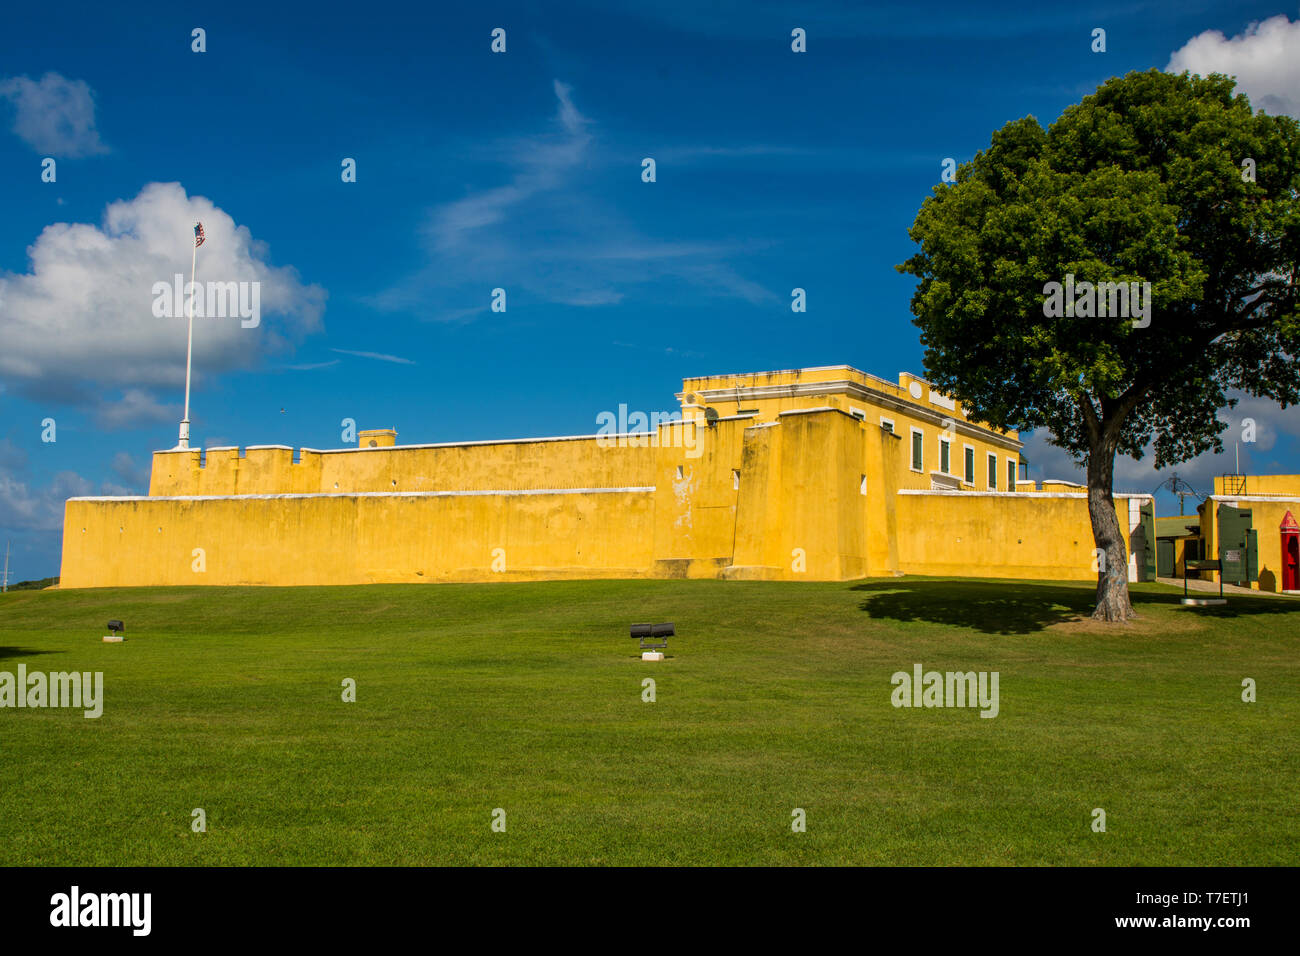 Fort Christiansvaern, Christiansted National Historic Site, Christiansted, St. Croix, Isole Vergini americane. Foto Stock